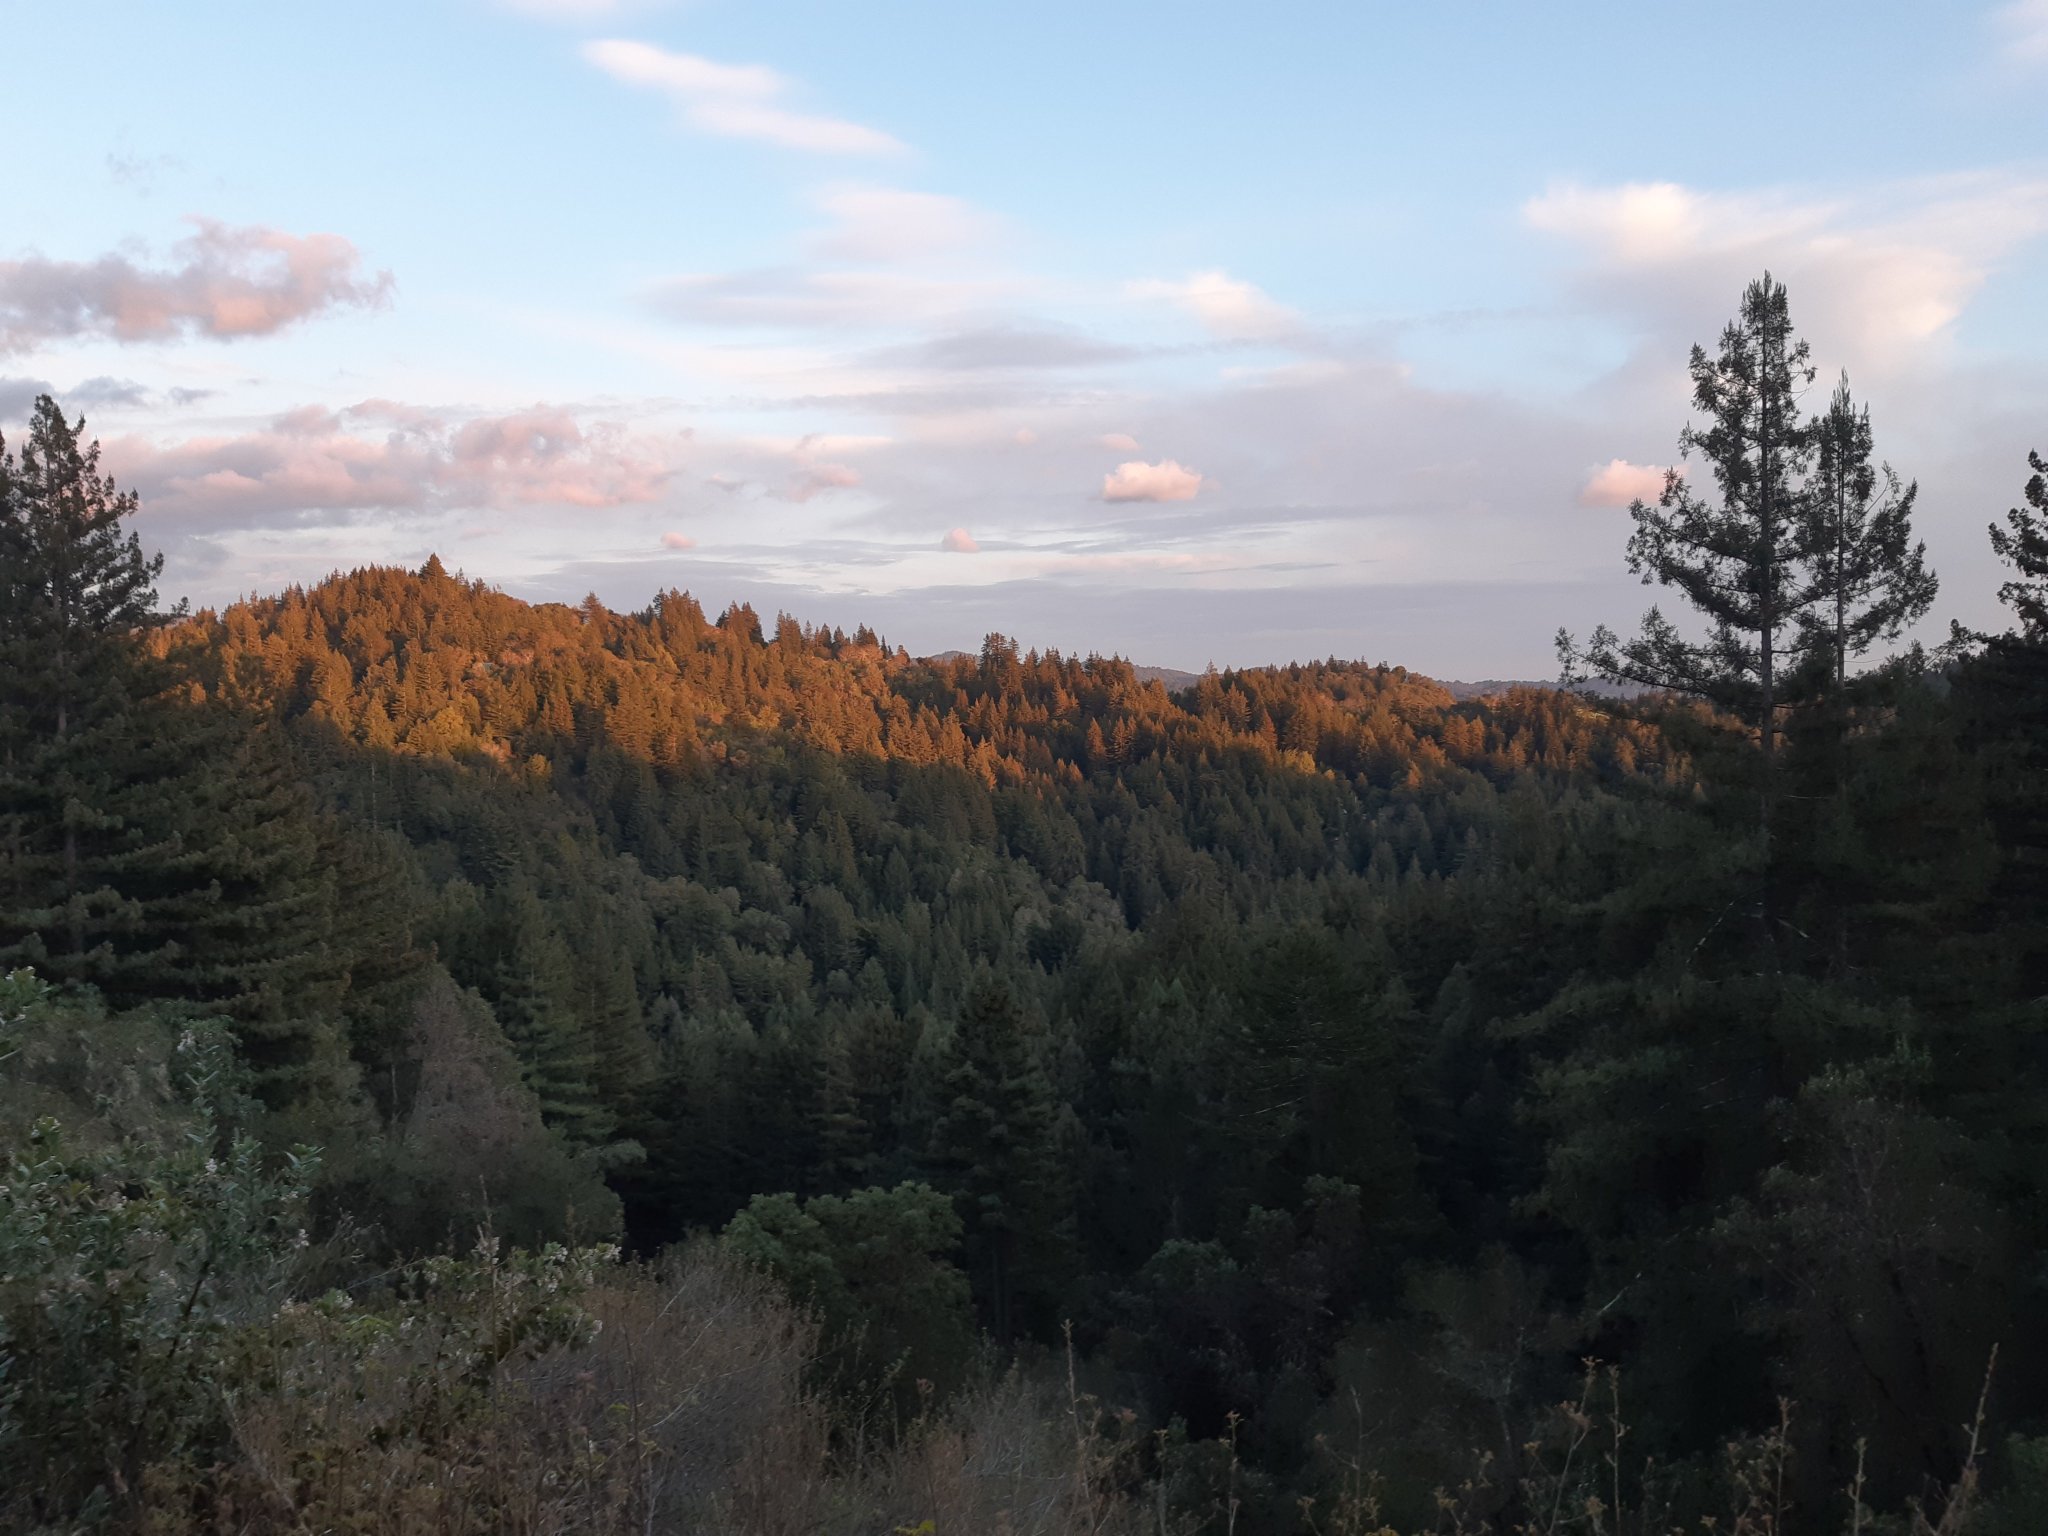 A photo of the sun setting on a mountain of coniferous trees